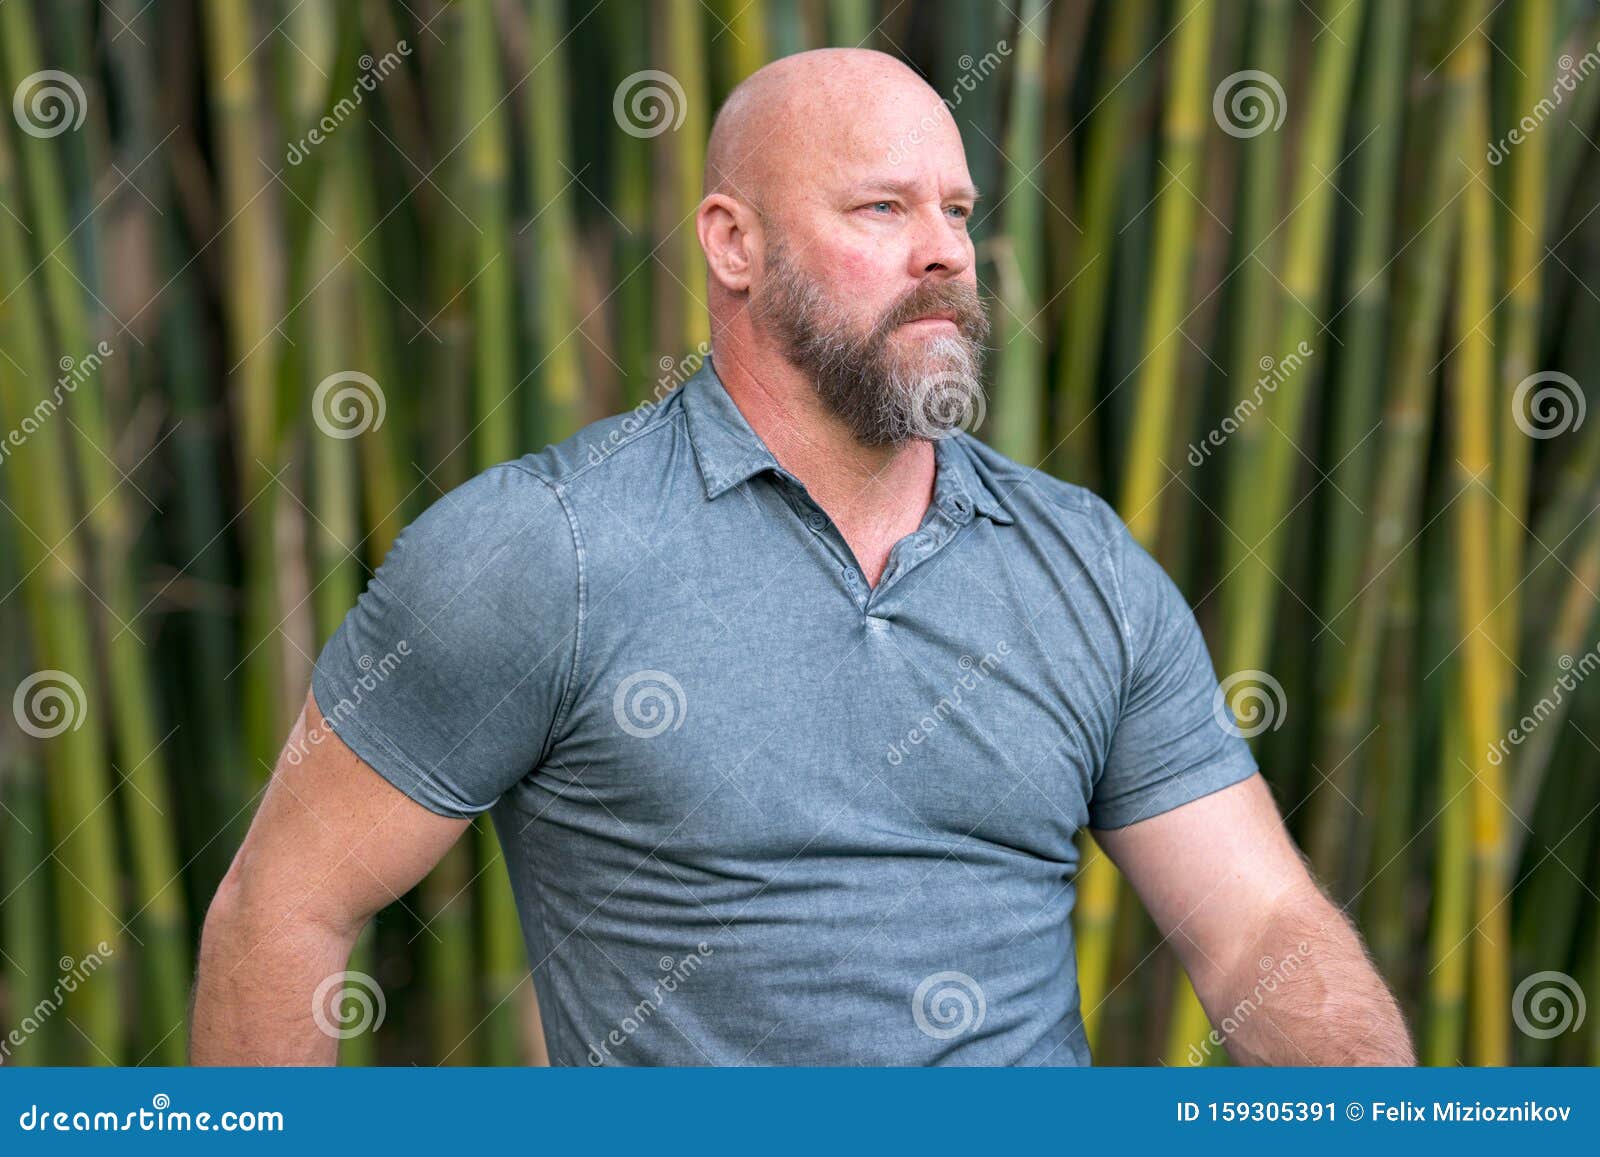 Tough Guy Looking Away from Camera. Bald Head with Full Beard Stock Image -  Image of candid, macho: 159305391